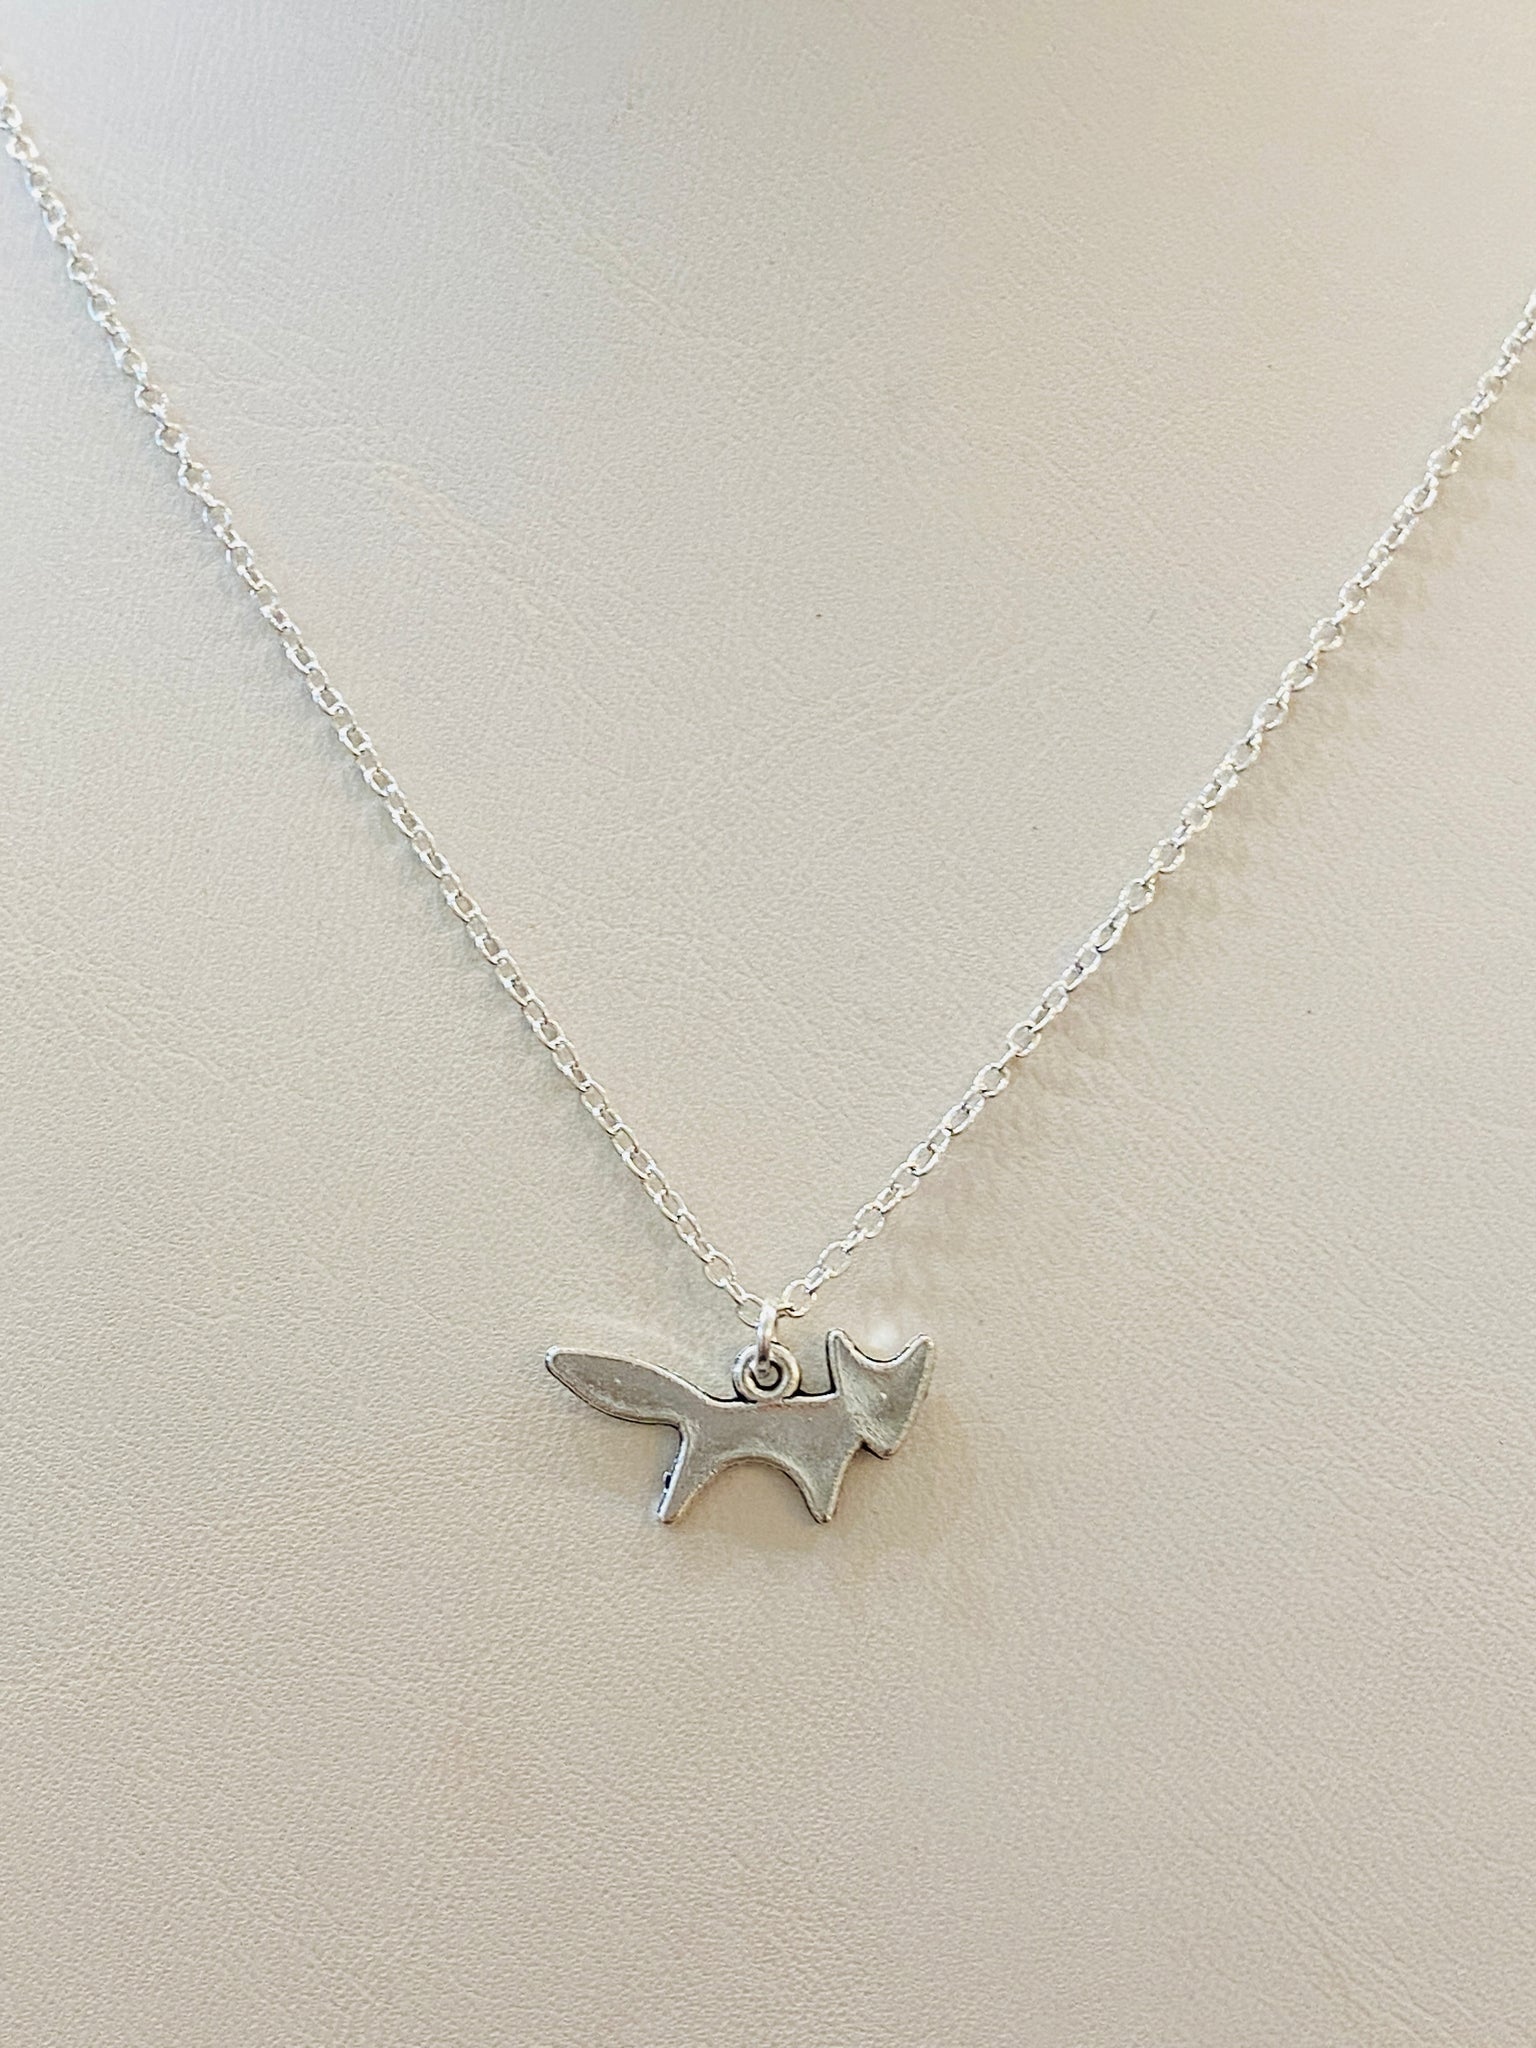 Silver Fox Charm Necklace